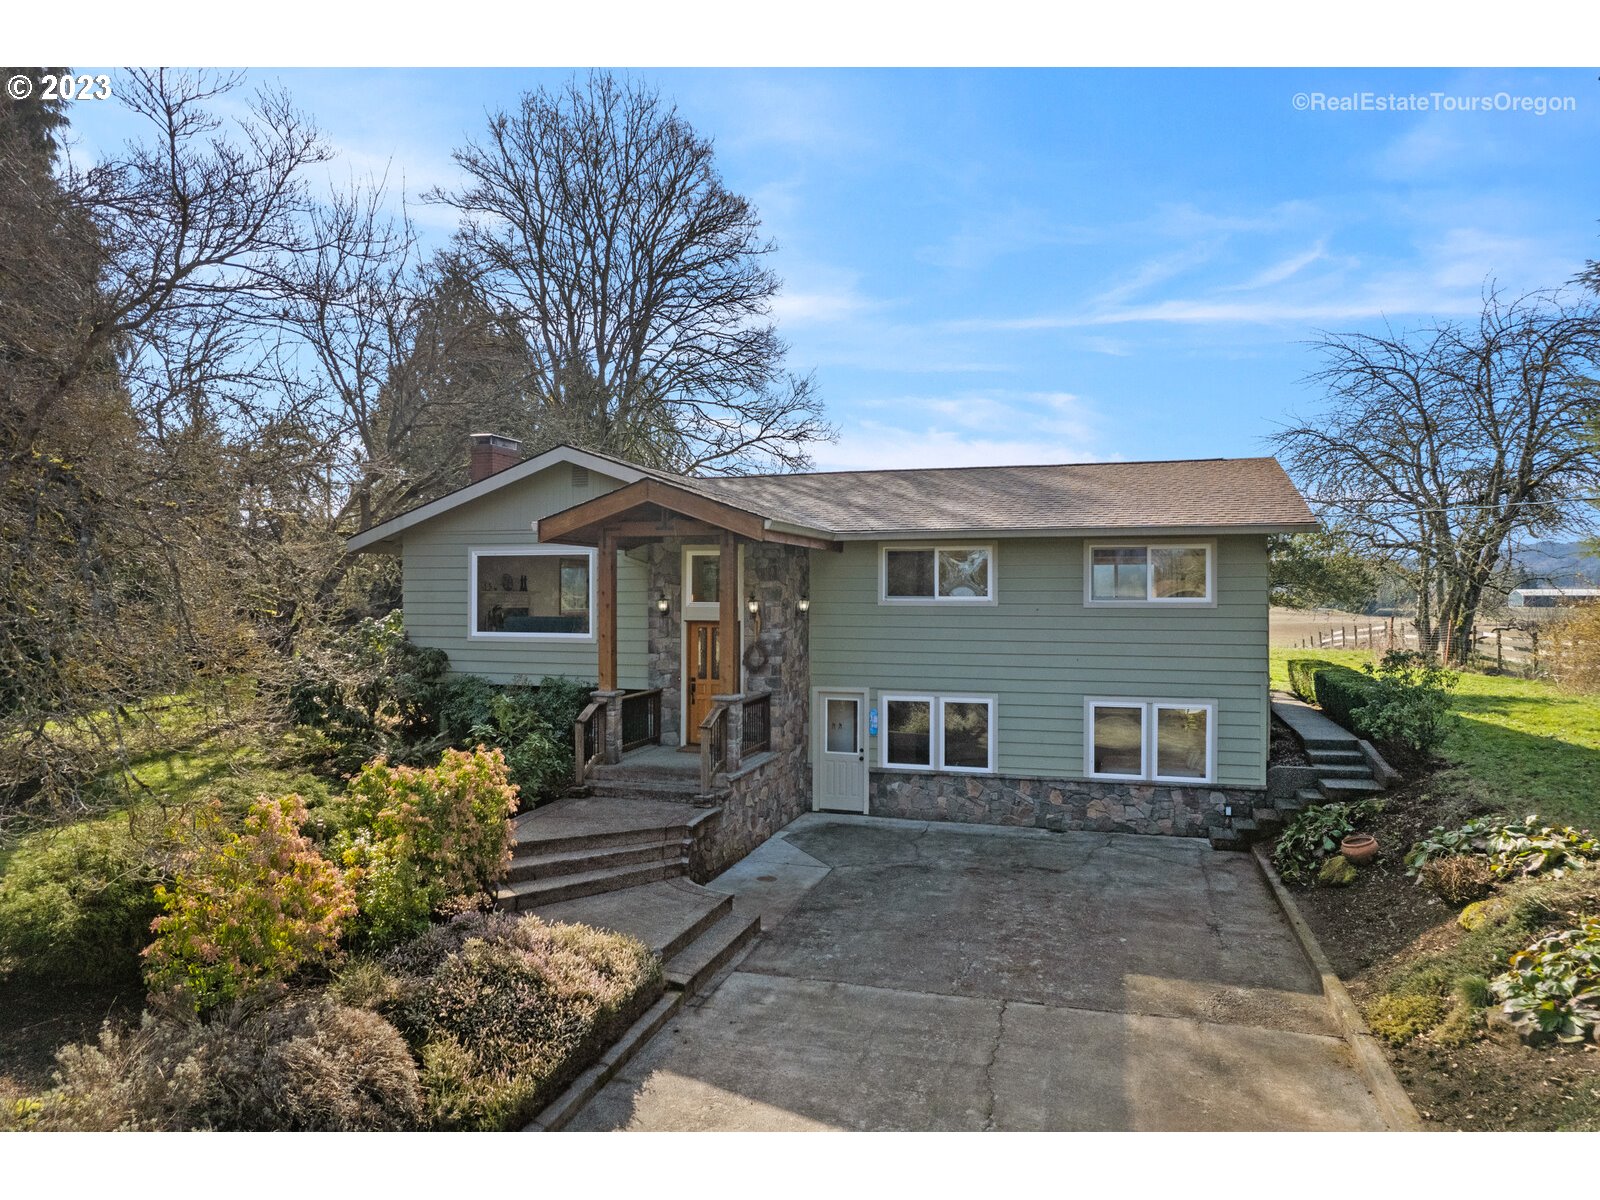 17224 NW LUCY REEDER RD, Portland, OR 97231